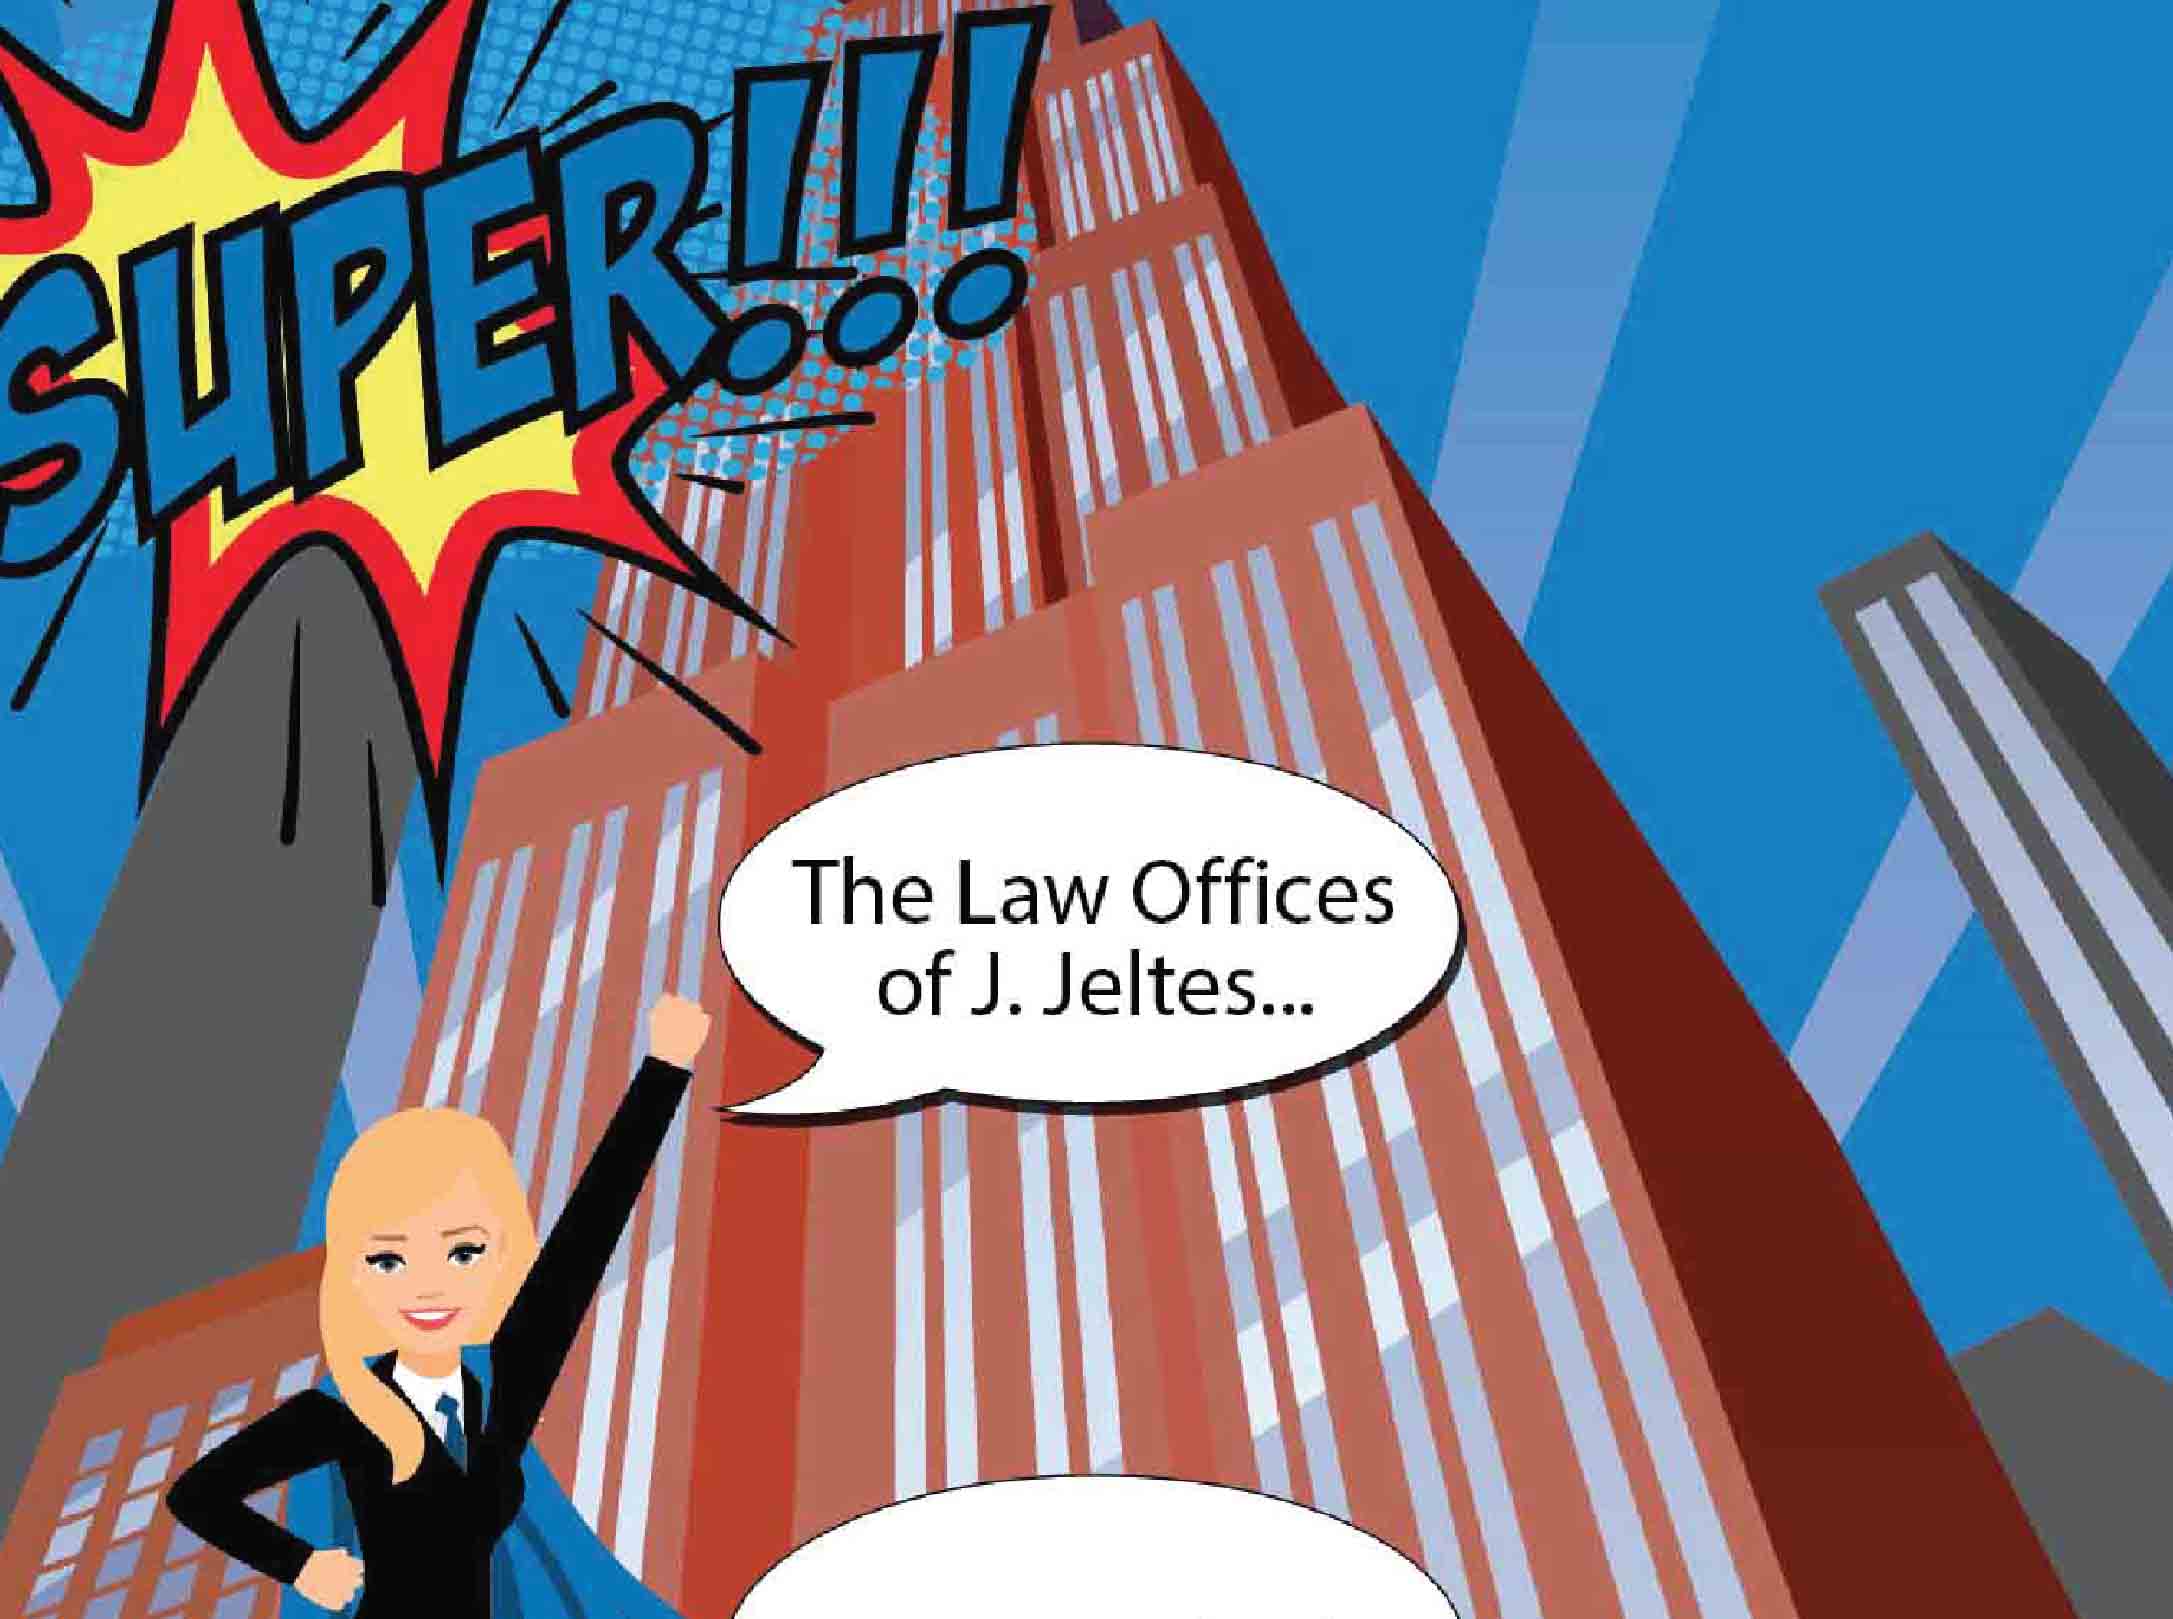 Cartoon Vector of Superwoman at J. Jeltes Law Office